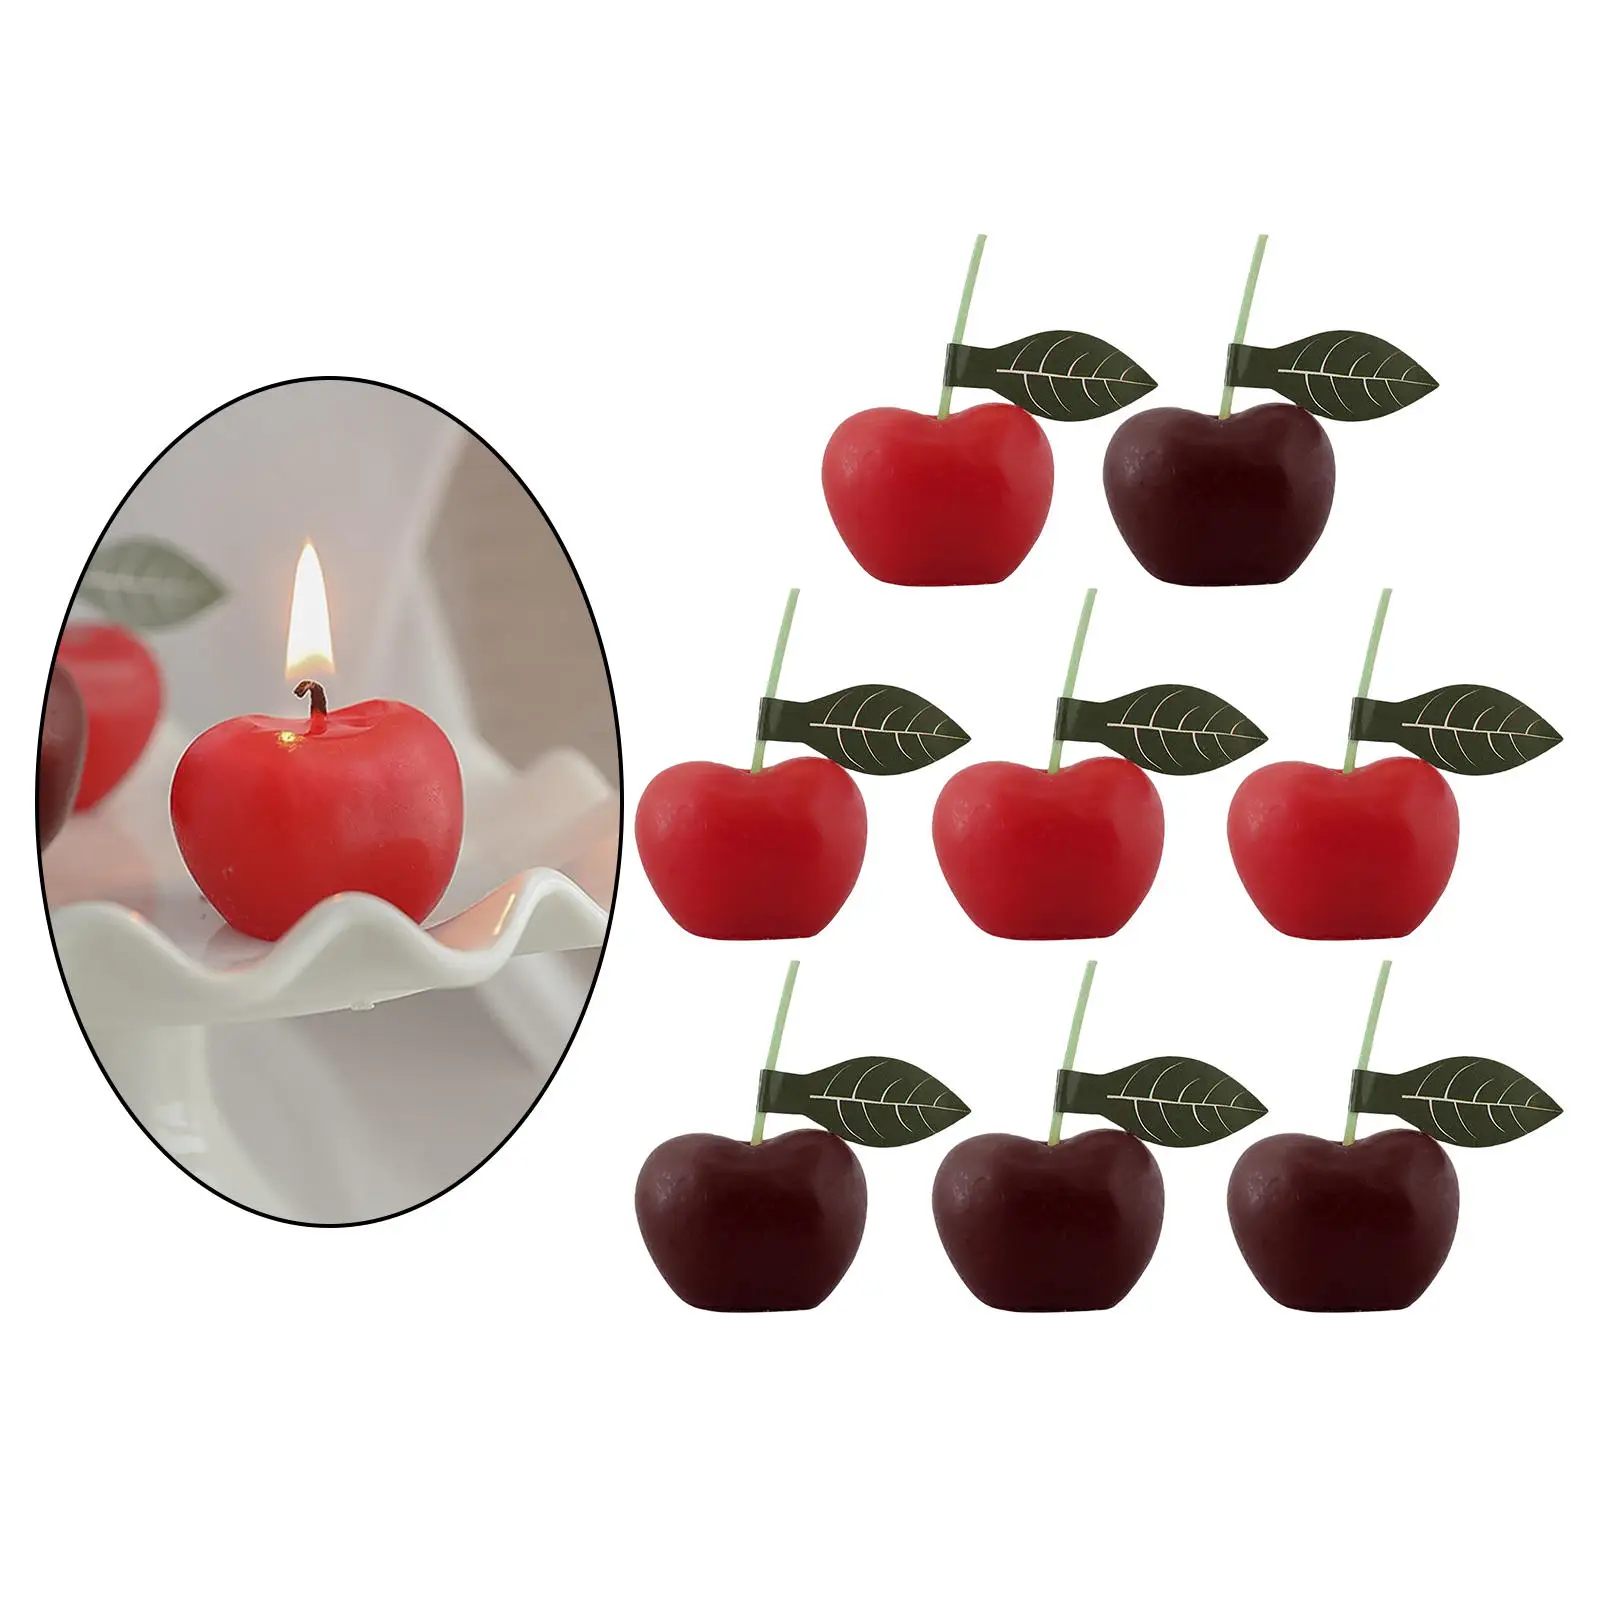 8pcs Home Decoration Cherry Scented Candle Smokeless Used For Festival Birthday Wedding Party Holiday Gift